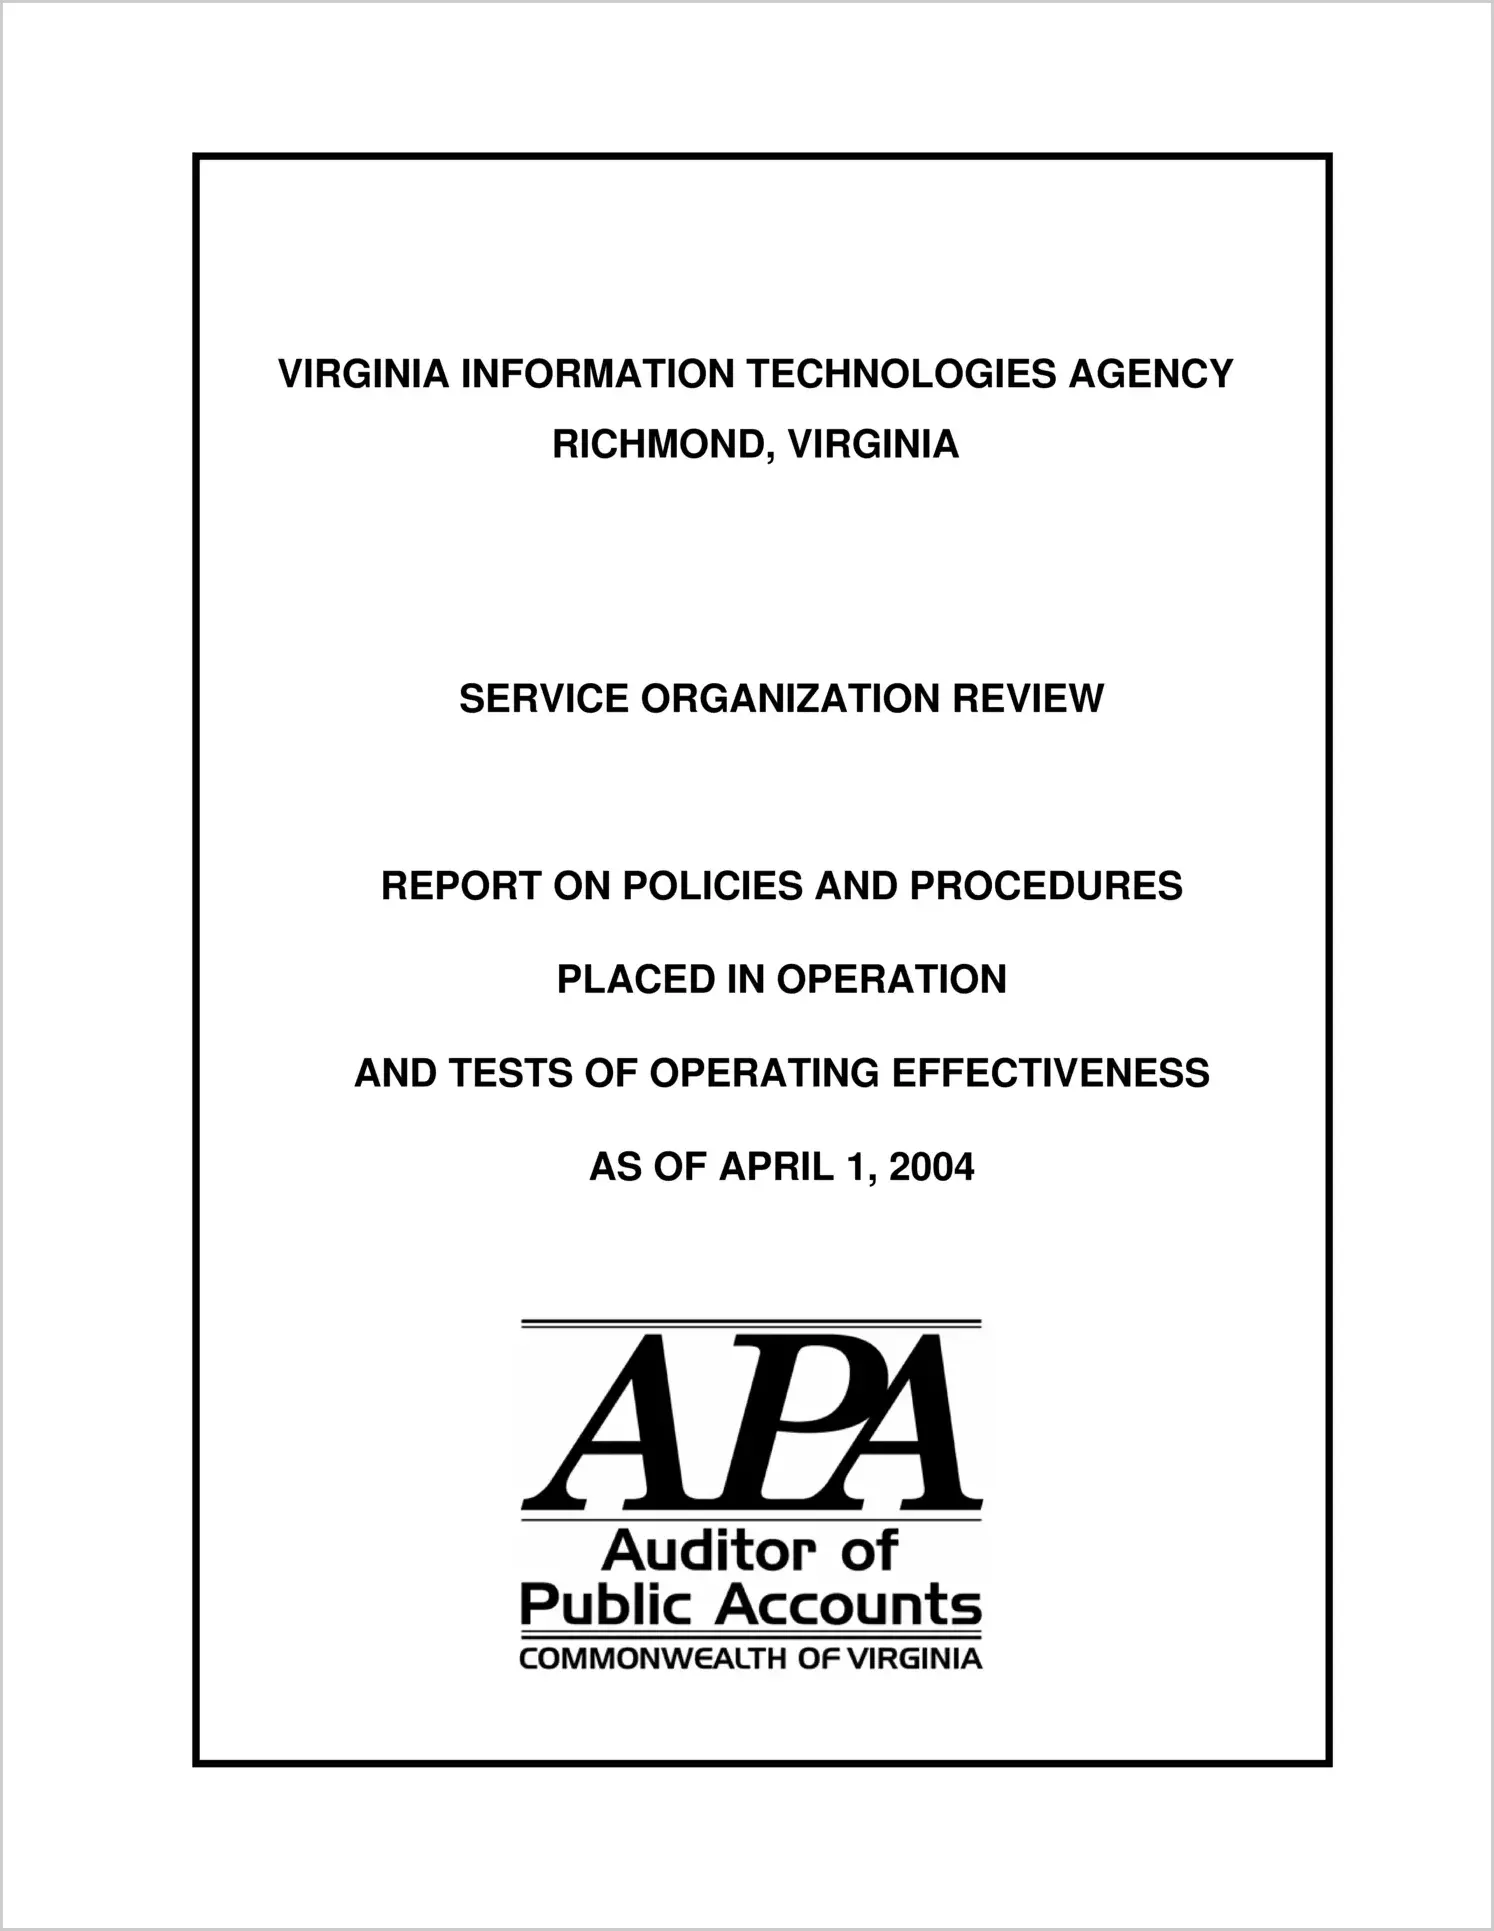 Special ReportVirginia Information Technologies Agency Service Organization Review Report on Policies and Procedures Placed in Operation and Tests of Operating Effectiveness as of April 1, 2004)(Report Date: 4/1/04)